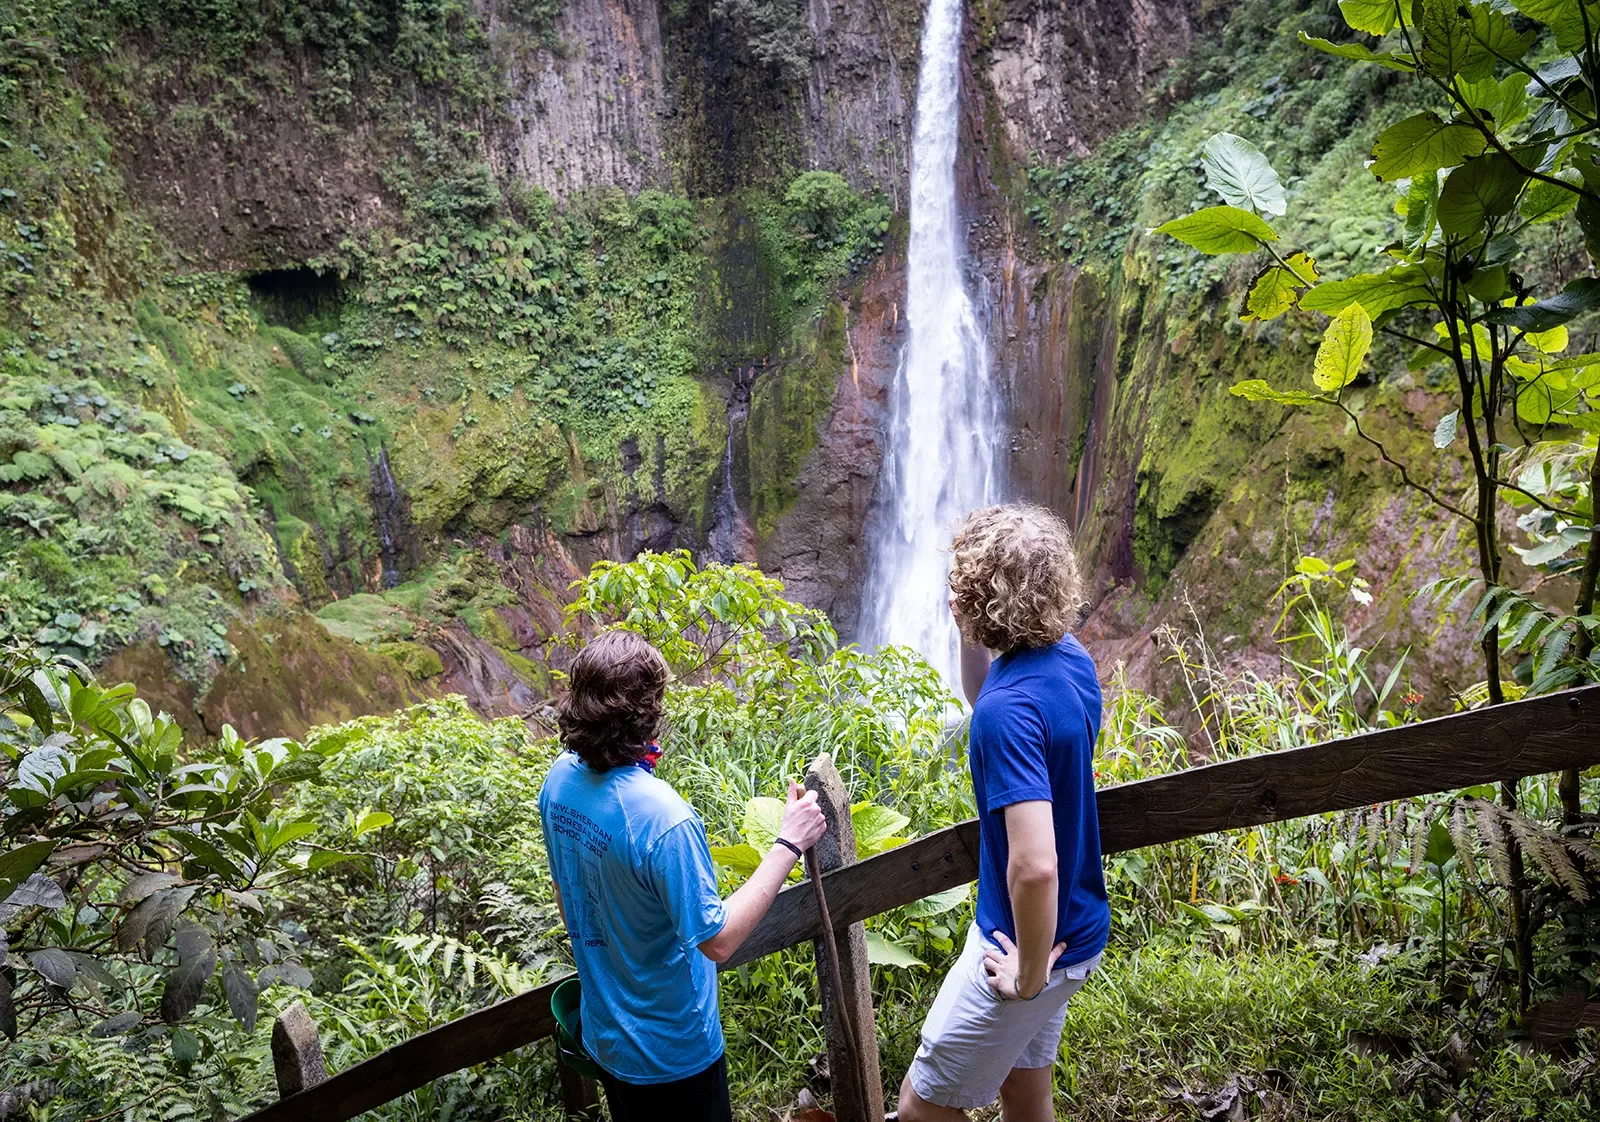 Two guests on forest path, looking down at forest, waterfall.